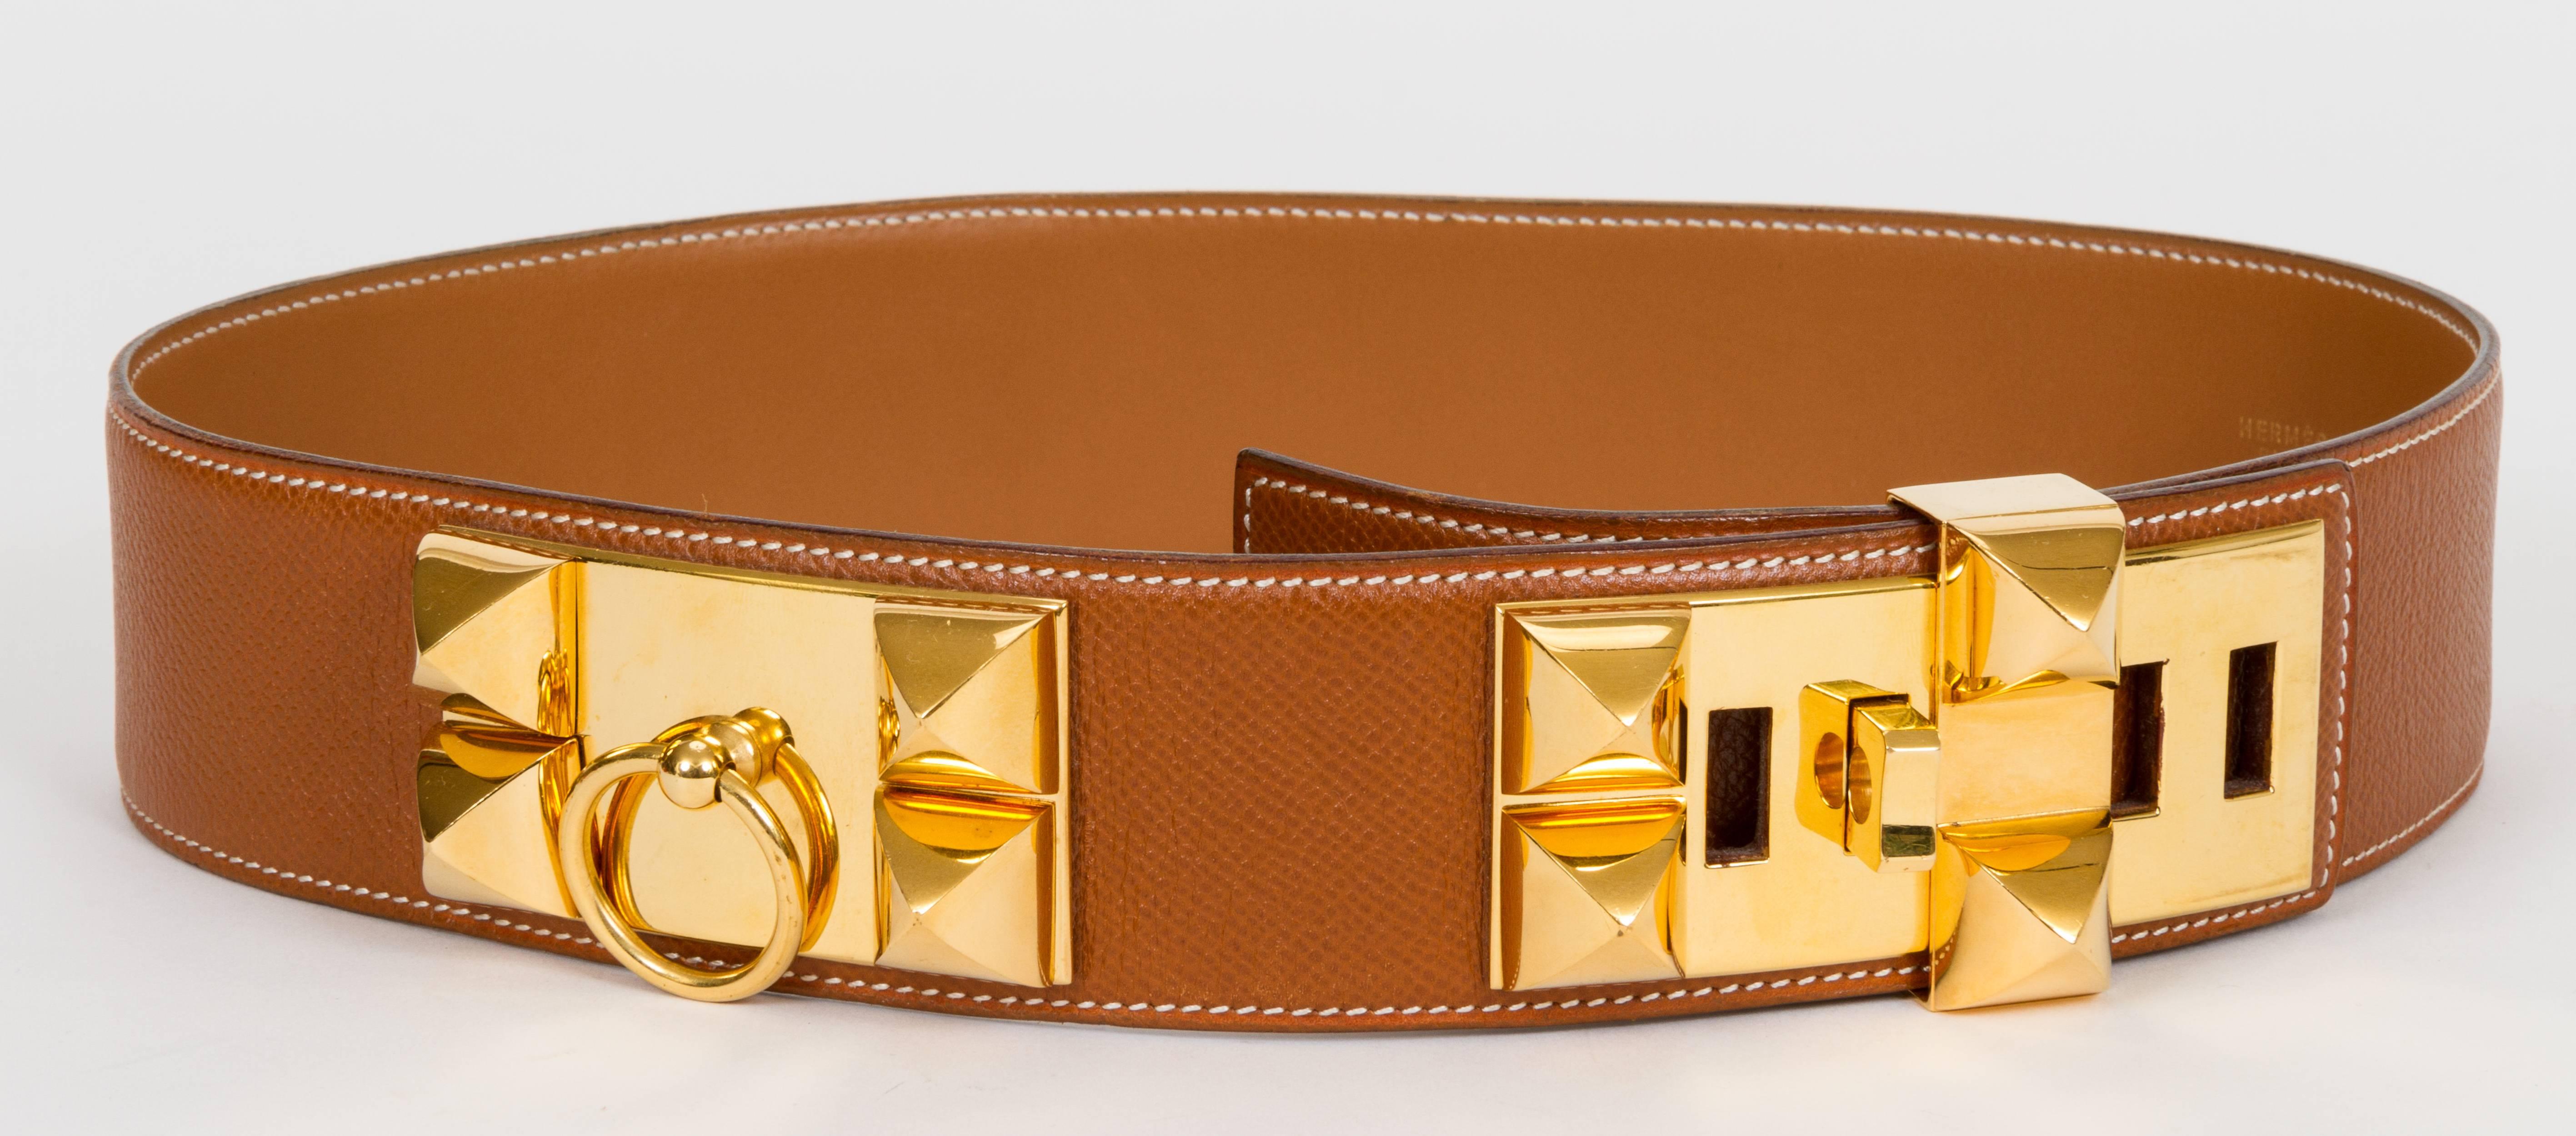 Hermès iconic Collier de Chien belt. Gold Epsom leather and gold rhodium hardware. Dated 